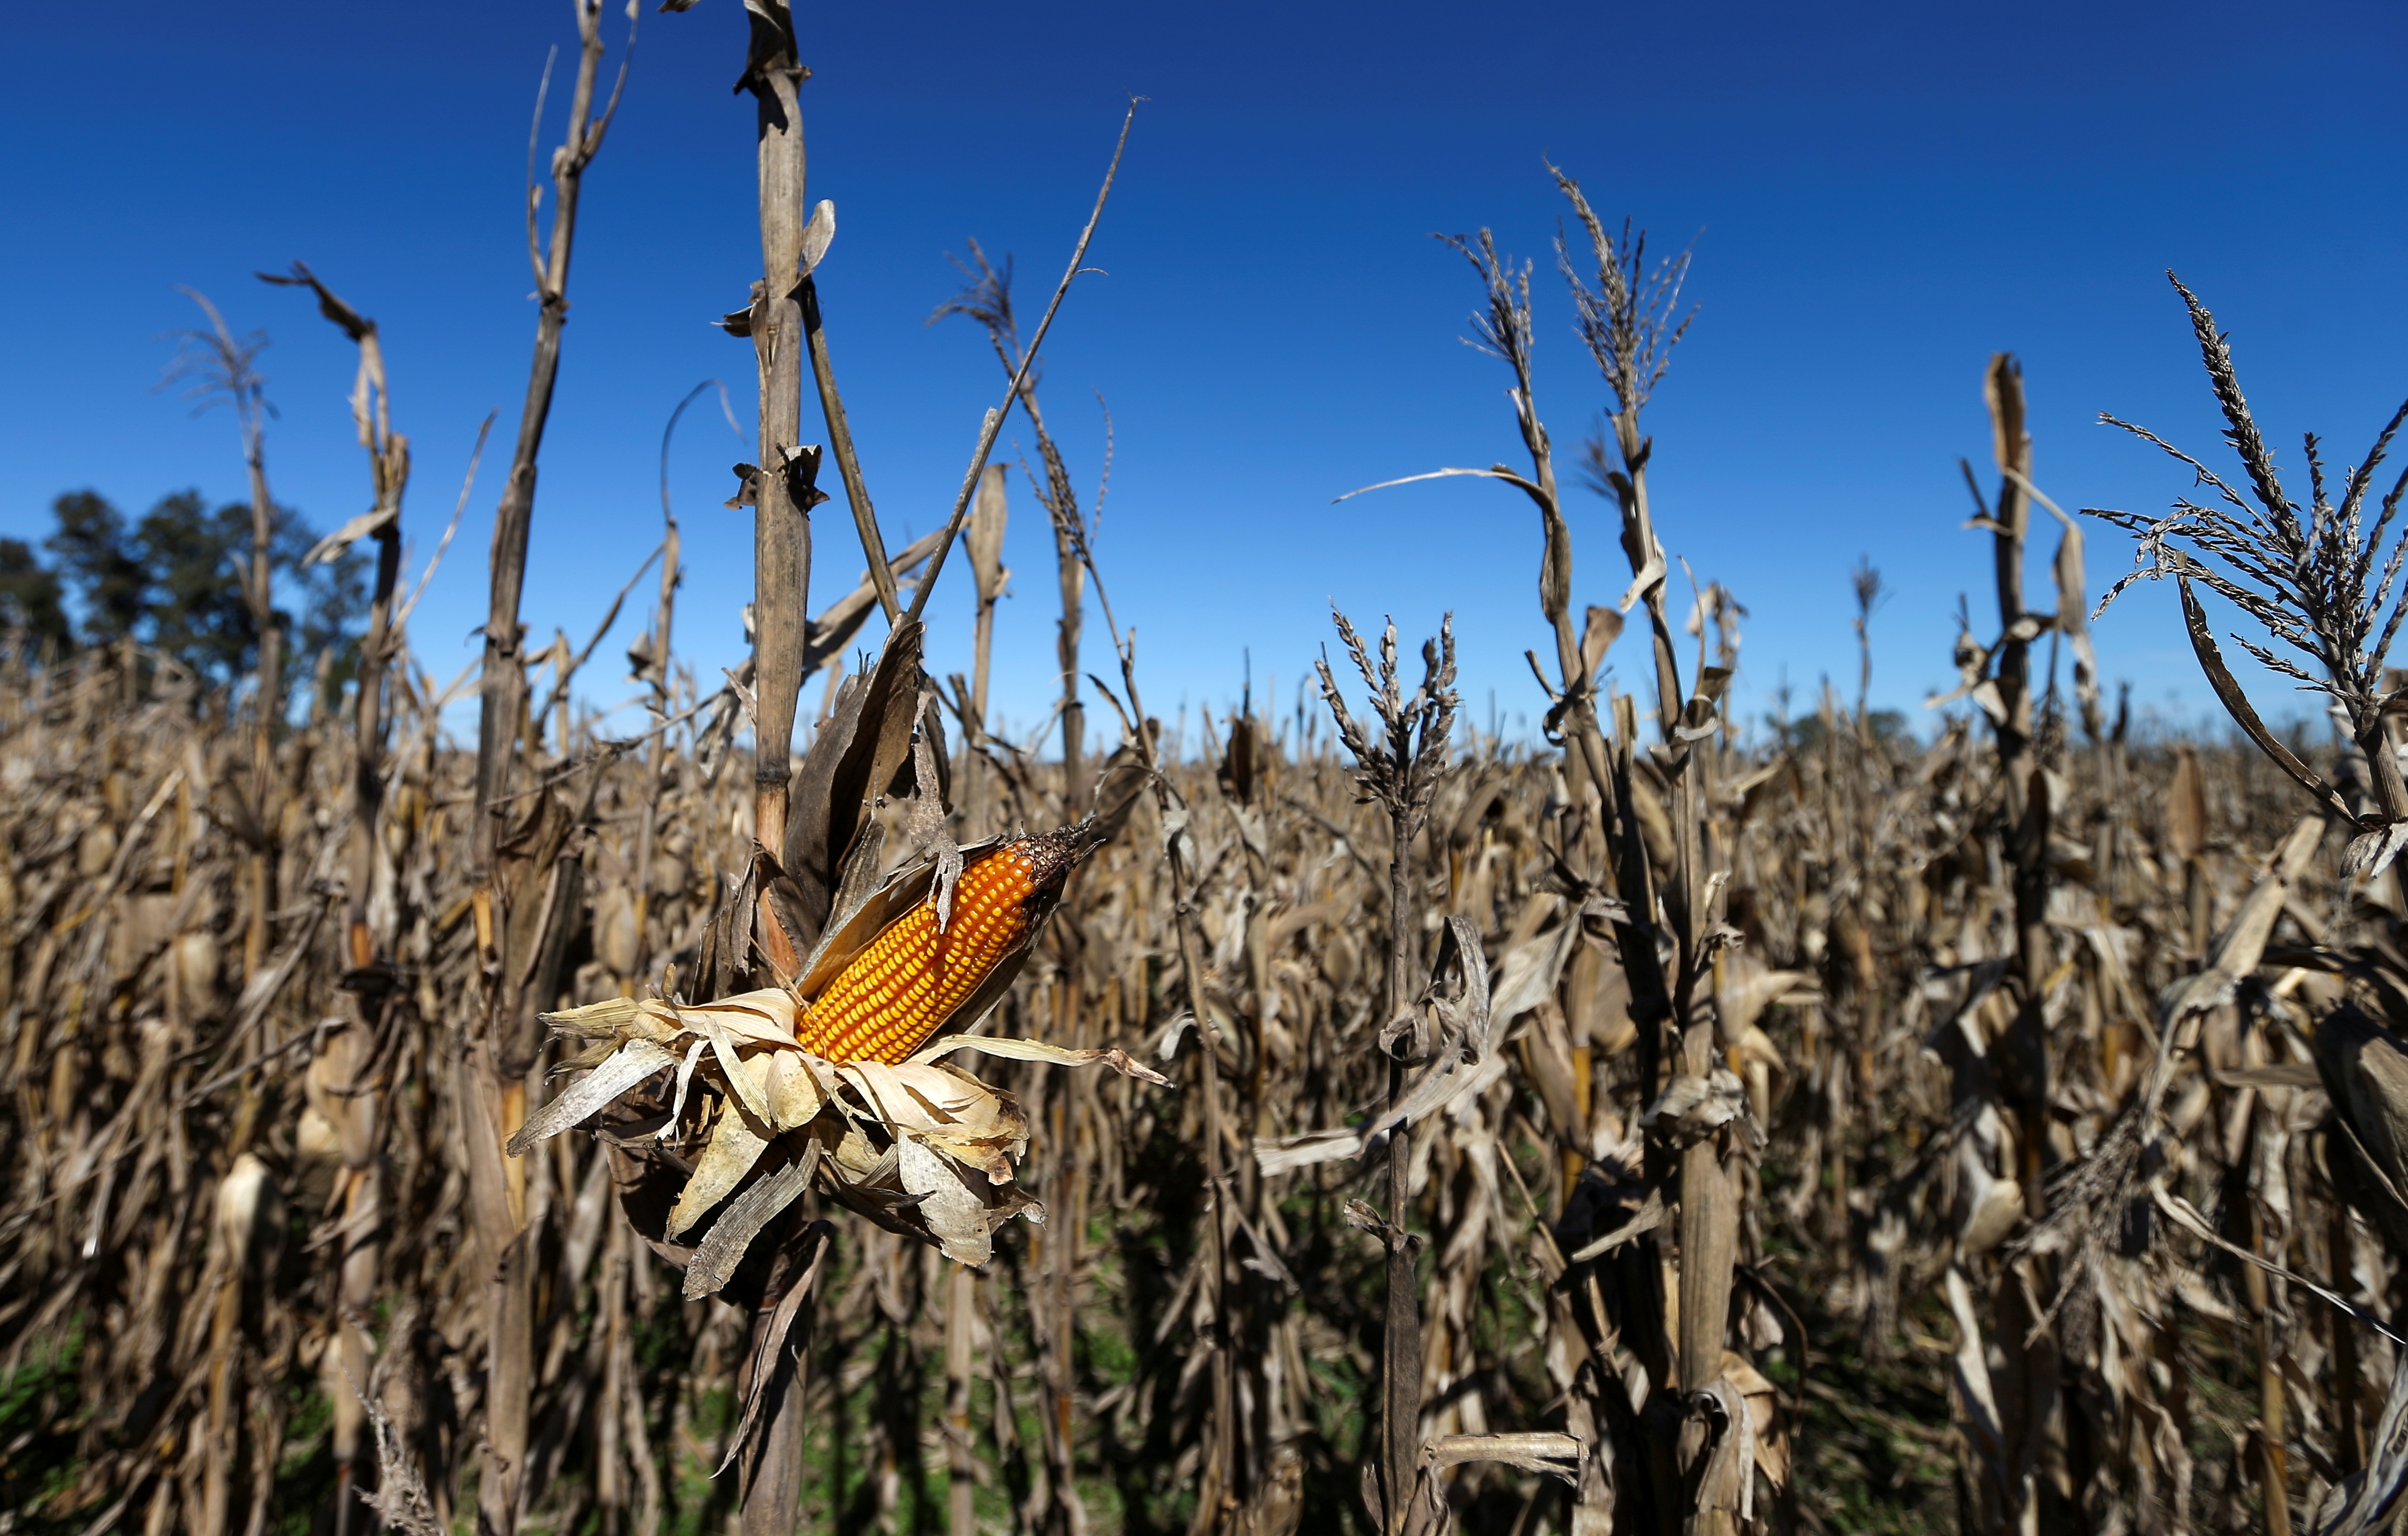 Corn plants are seen in a farm in Lujan, on the outskirts of Buenos Aires